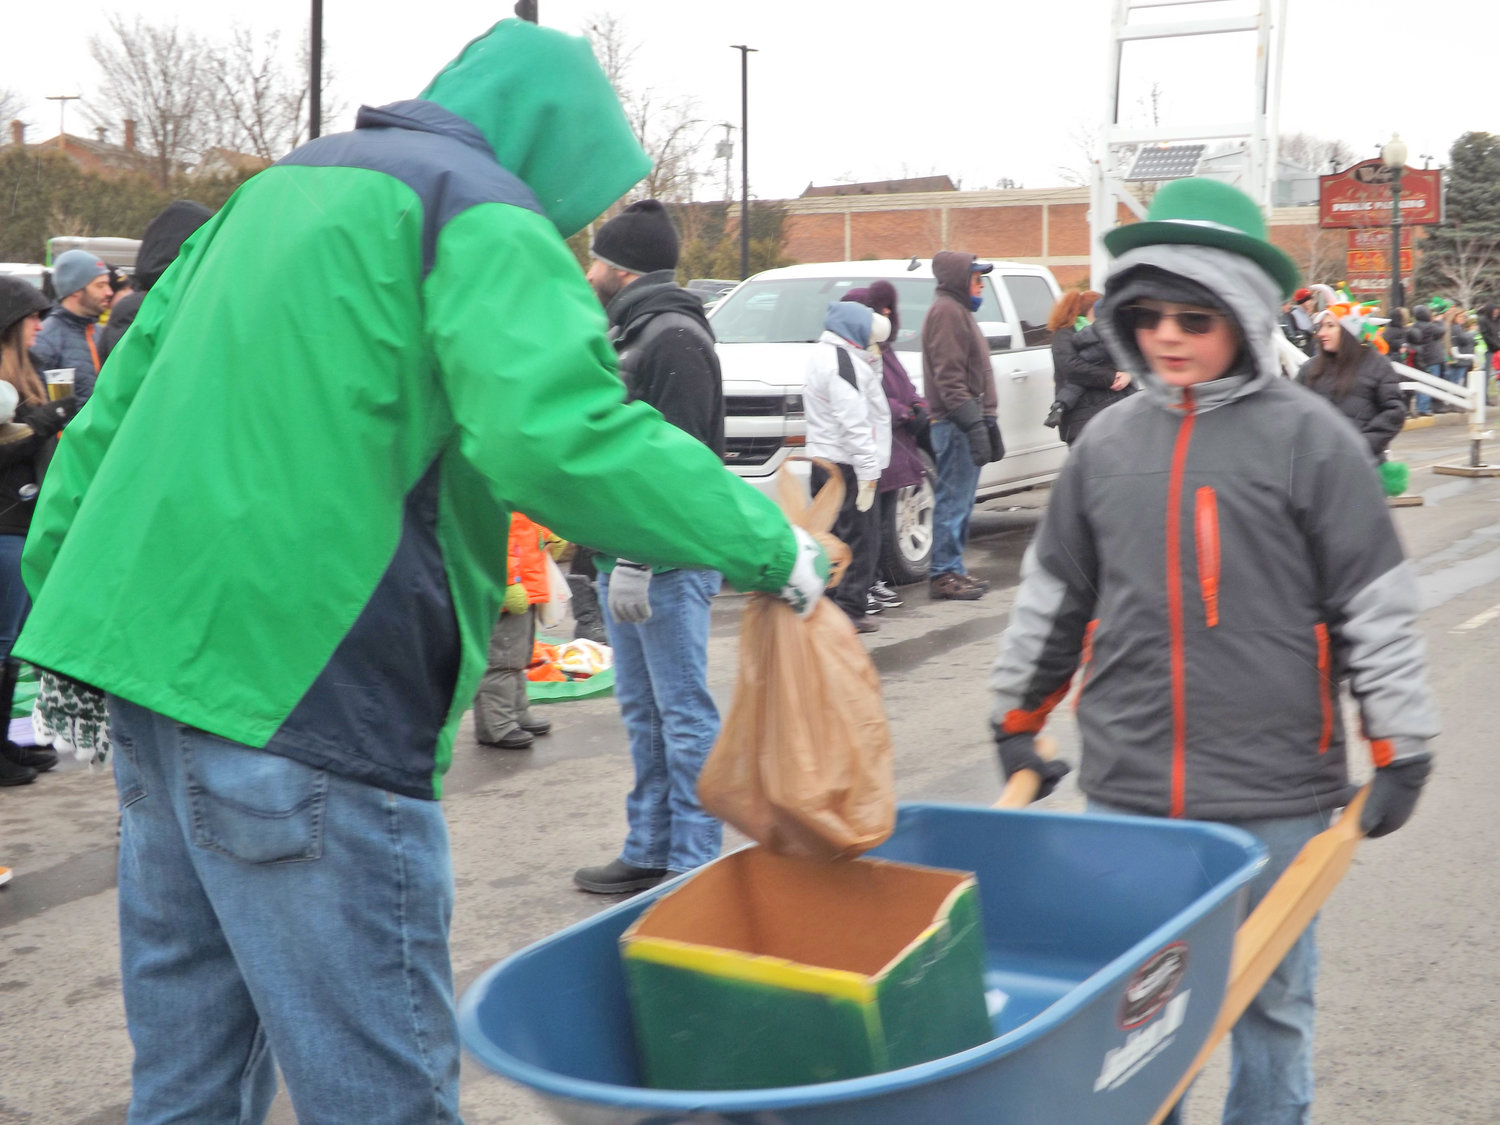 HELP FOR HUNGRY — An attendee of a previous St. Patrick’s Day Parade in Utica donates non-perishable food items in this file photo. Event organizers are once again collection donations of food or money to help the Mother Marianne West Side Kitchen feed those in need in the community.